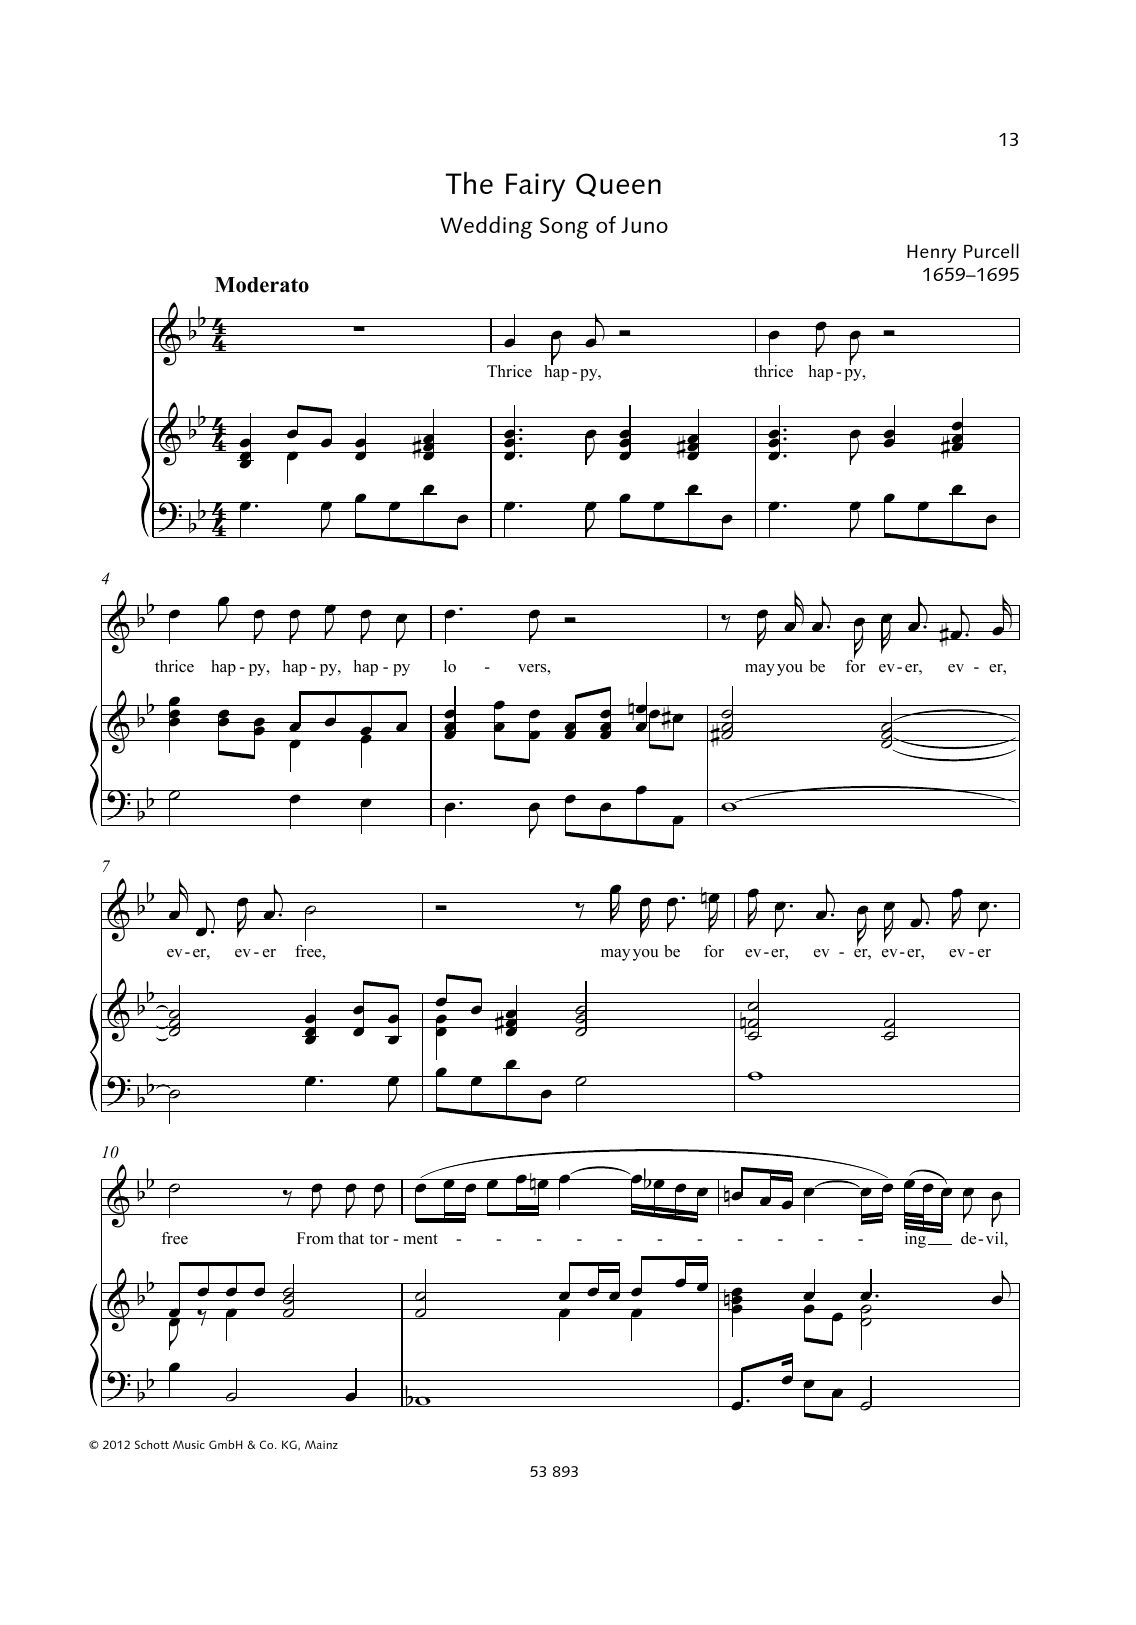 Download Henry Purcell Thrice Happy Lovers Sheet Music